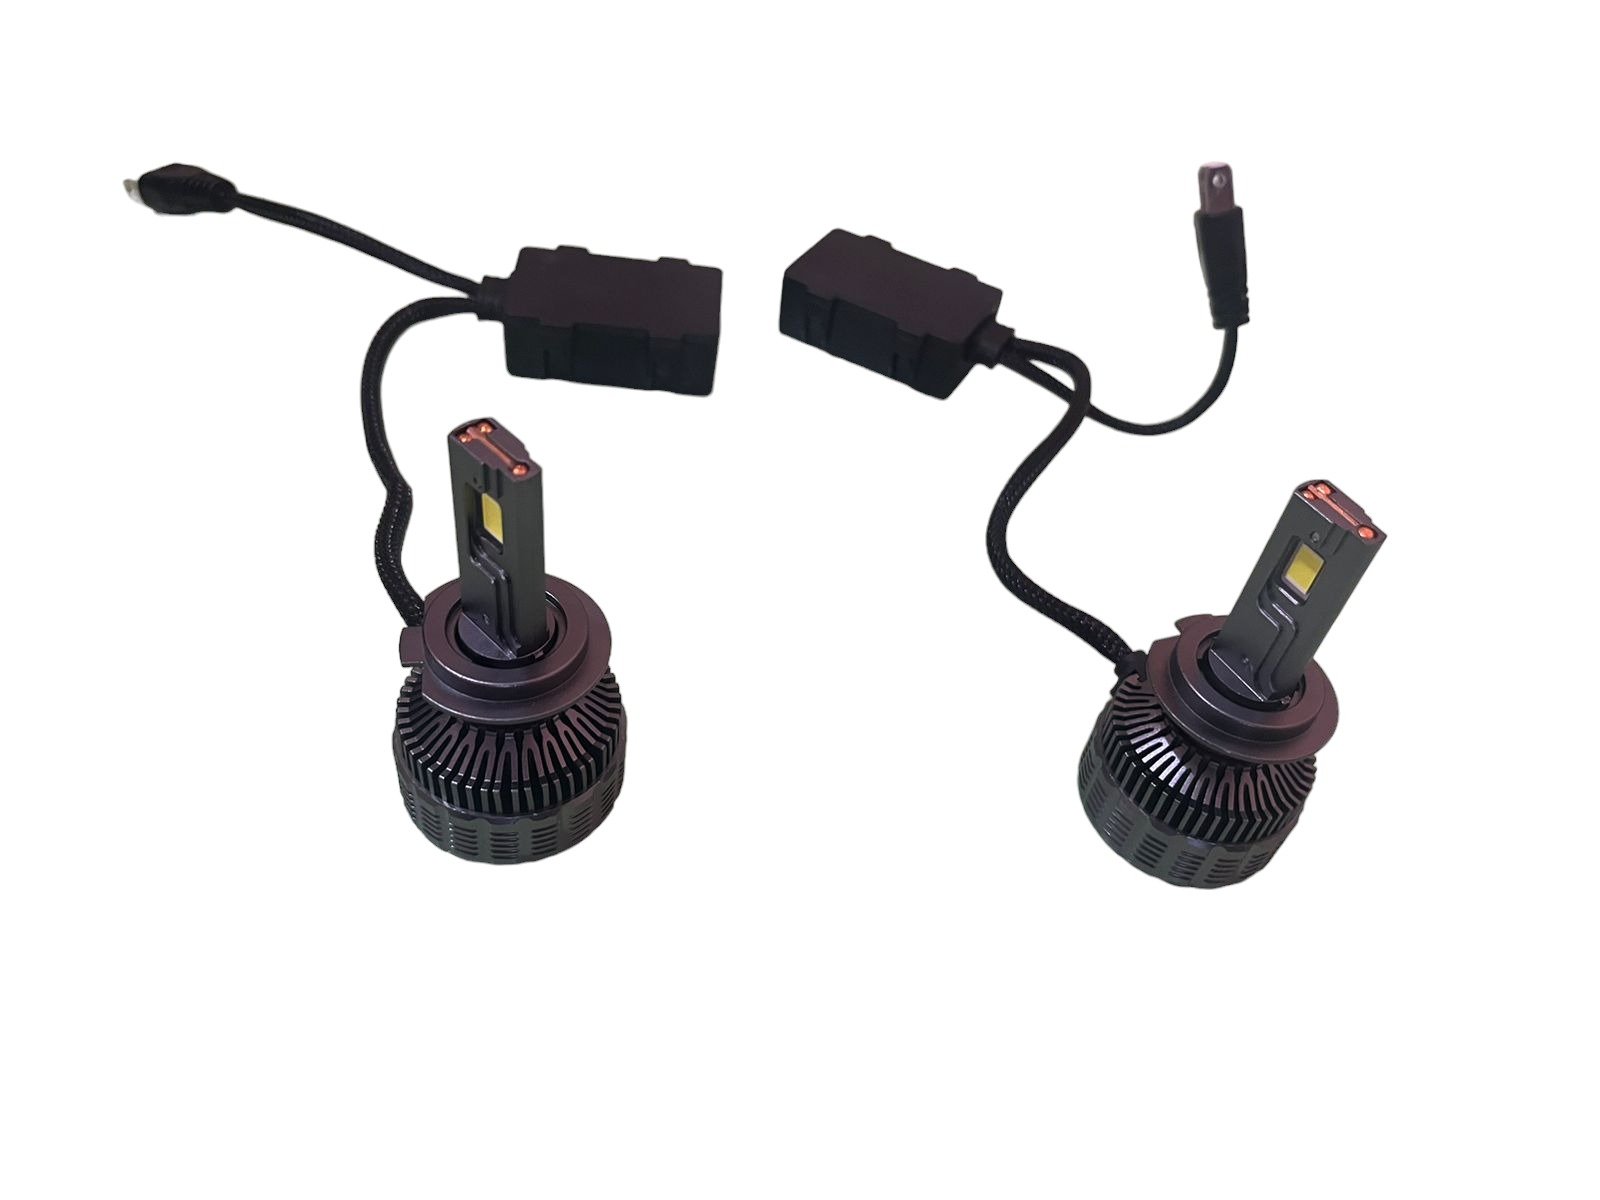 H4 High Quality Super Bright LED For Car 300W/30000LM Pair 6500K With 1Year Warranty (H4/H19) Image 